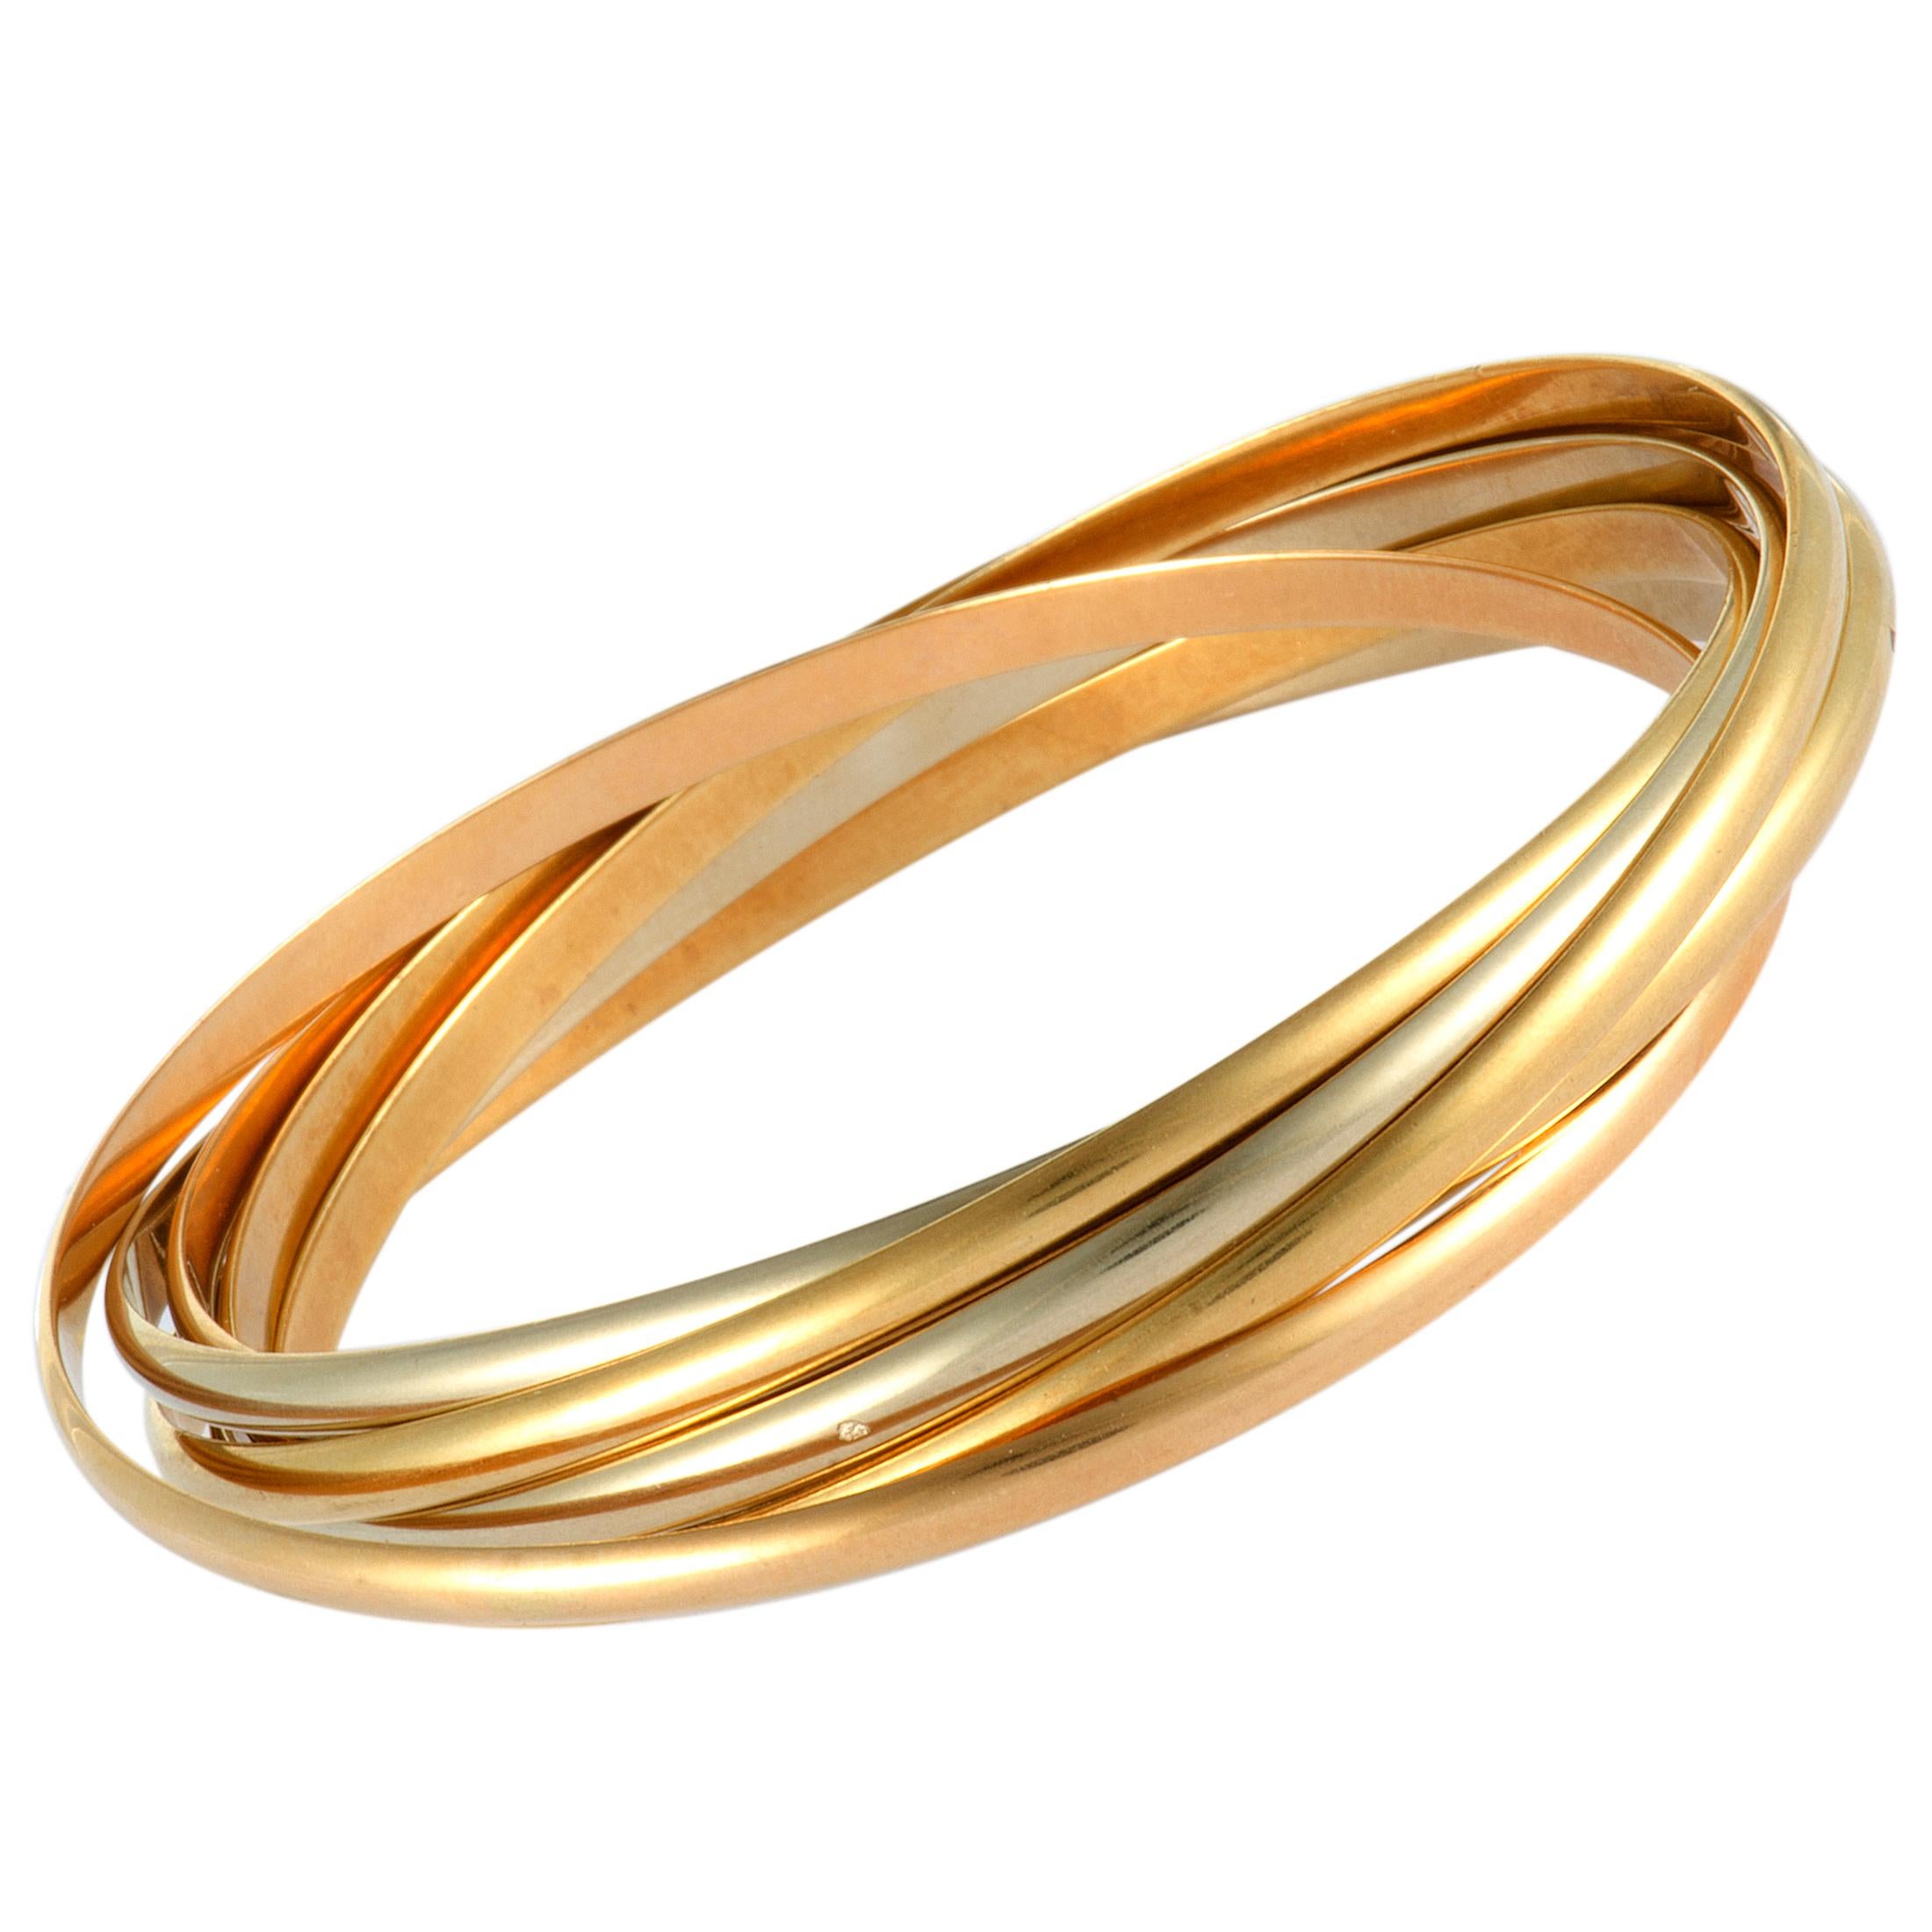 Cartier Trinity White, Yellow and Rose Gold Rolling Bangle Bracelet